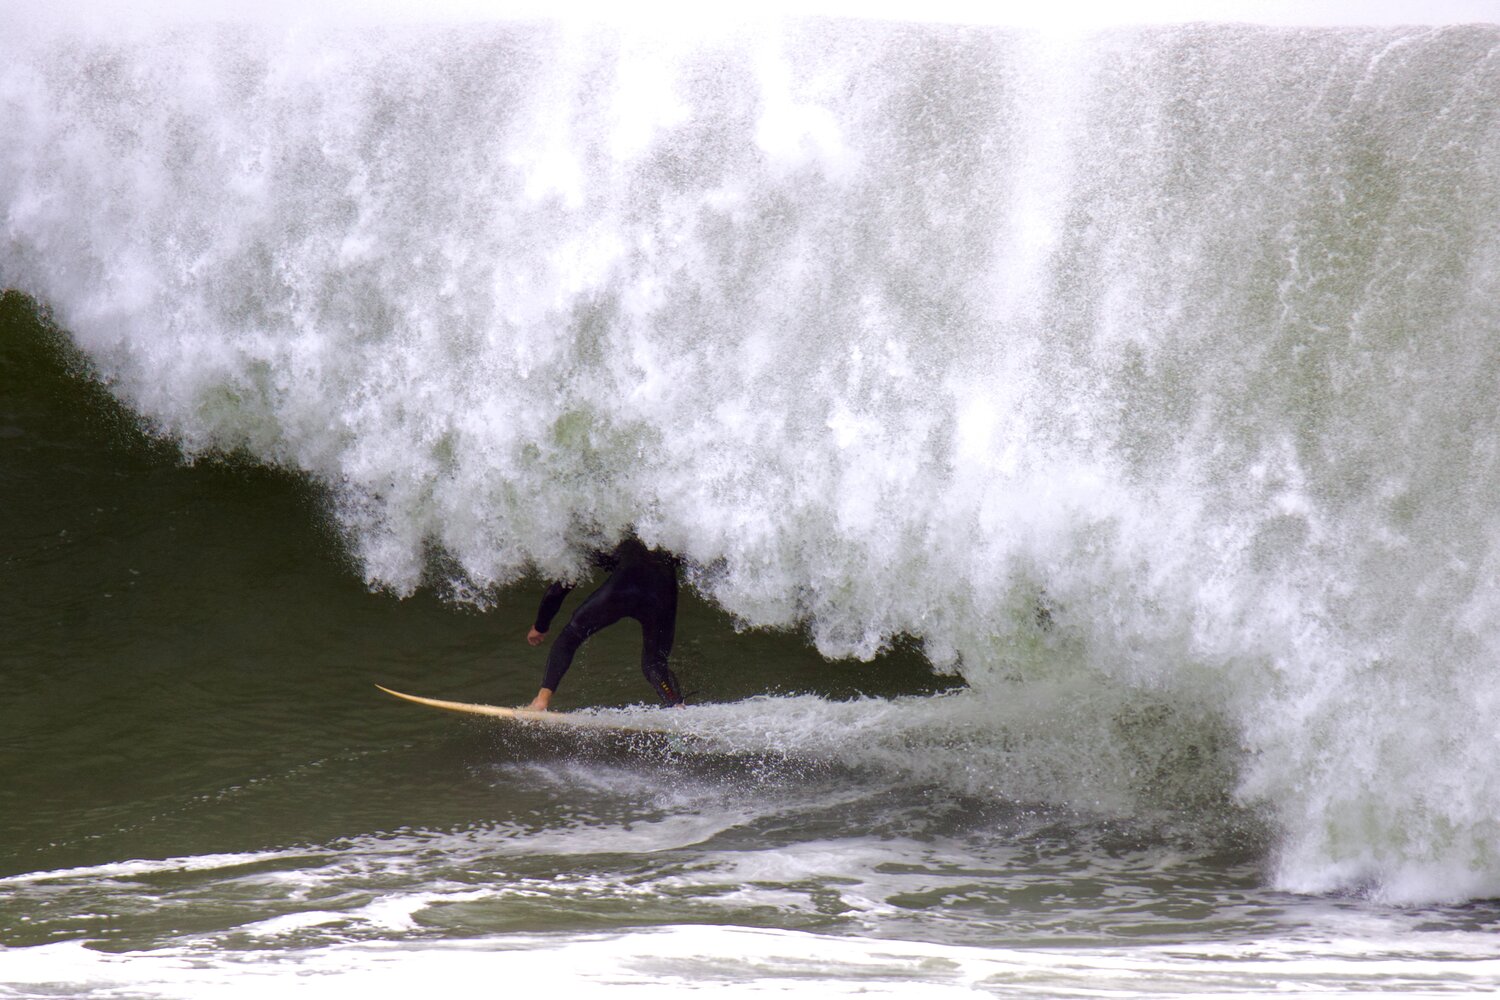 Several surfers took advantage of high surf from Hurricane Lee on Friday at Maddequecham Beach.